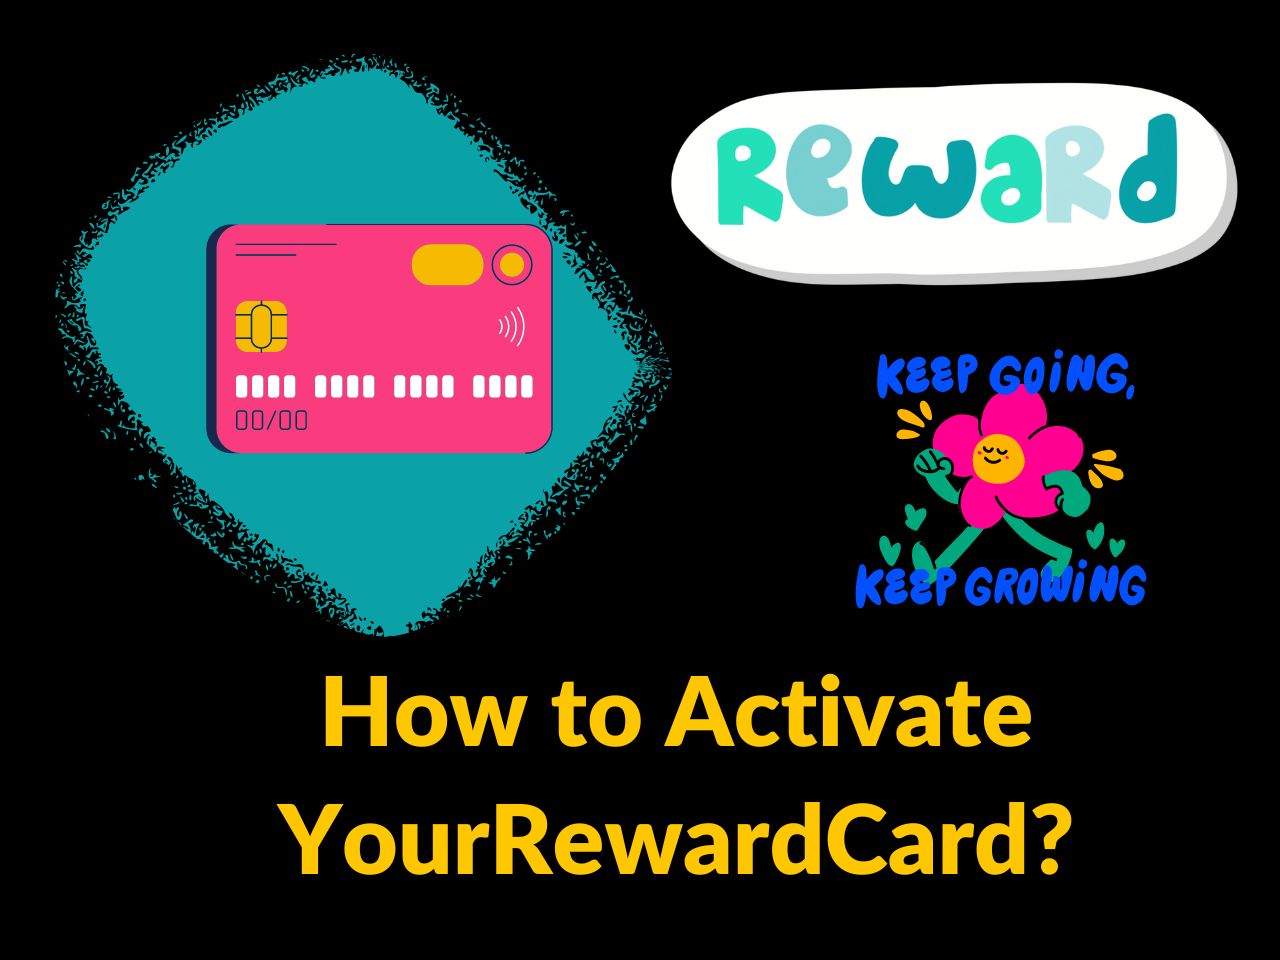 How to Activate YourRewardCard